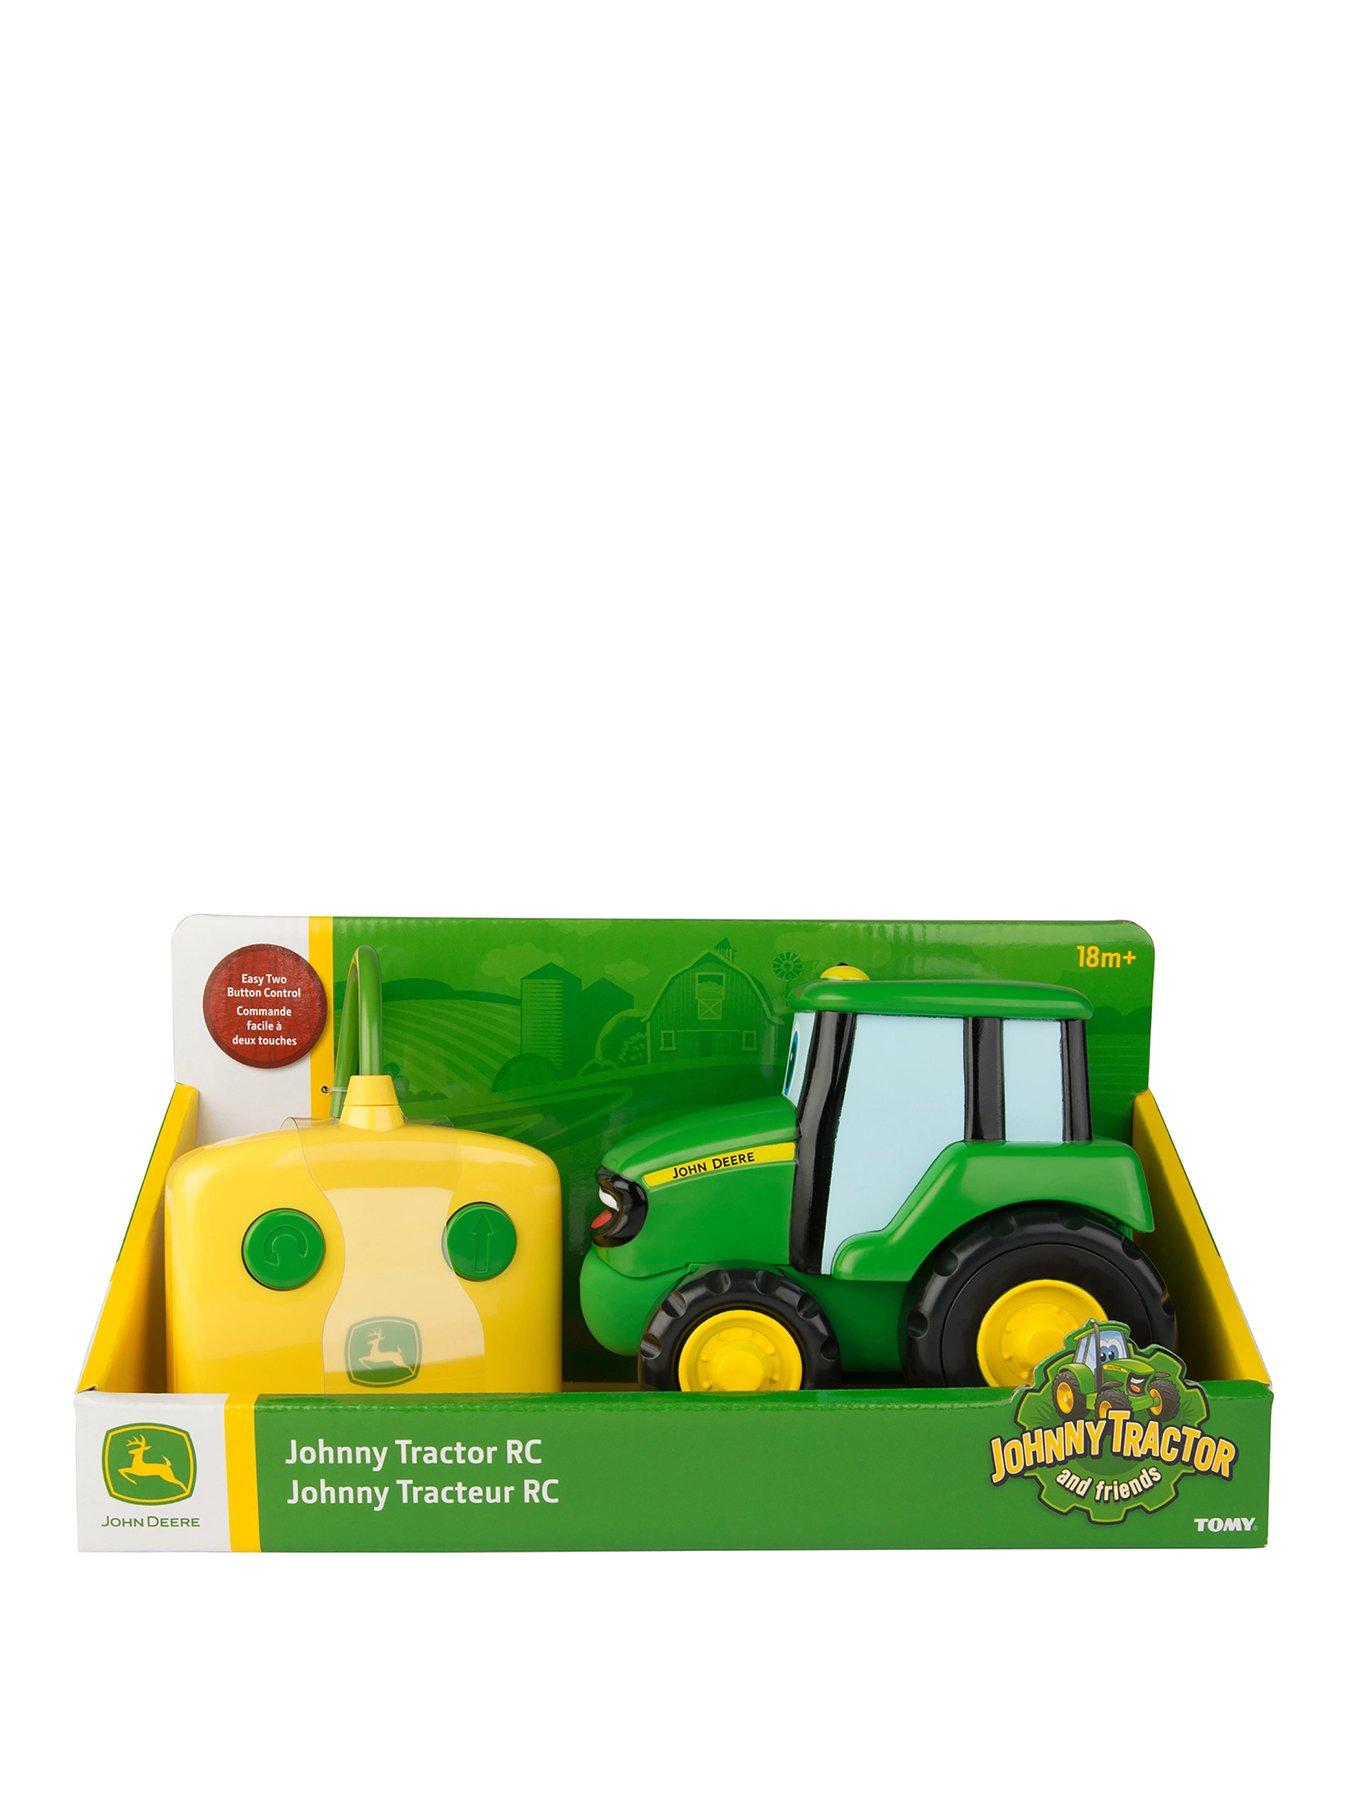 johnny tractor rc